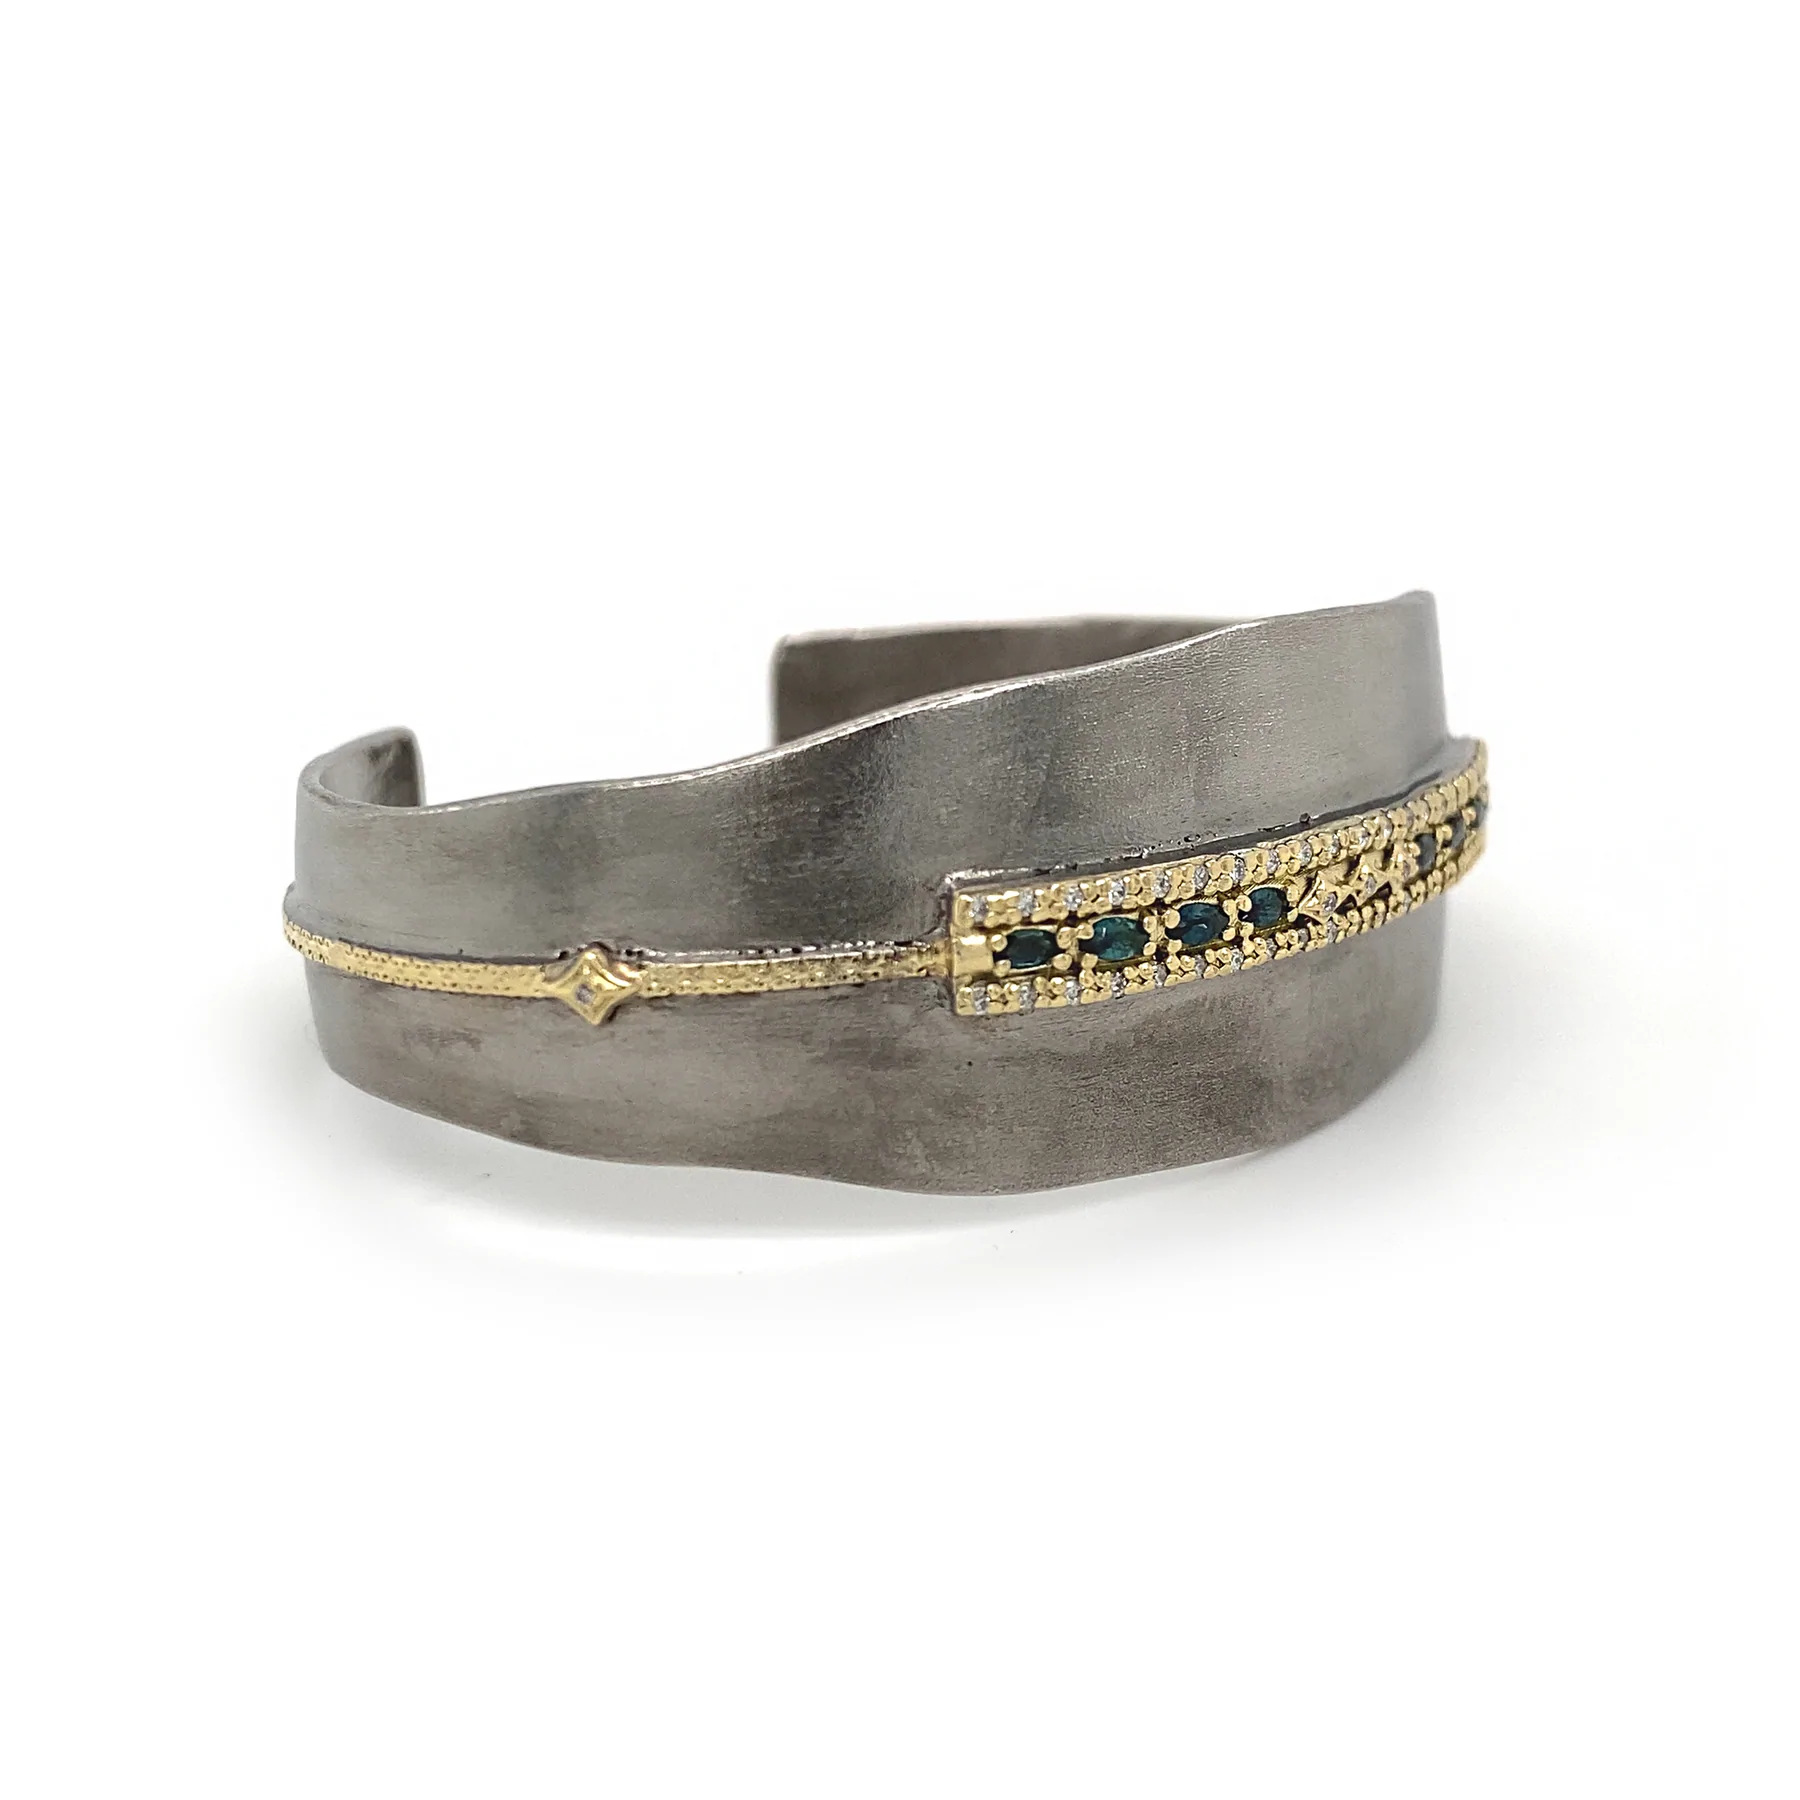 Sterling Silver Green Tourmaline Wide Cuff Bracelet, Sterling silver and 18k yellow gold', Long's Jewelers